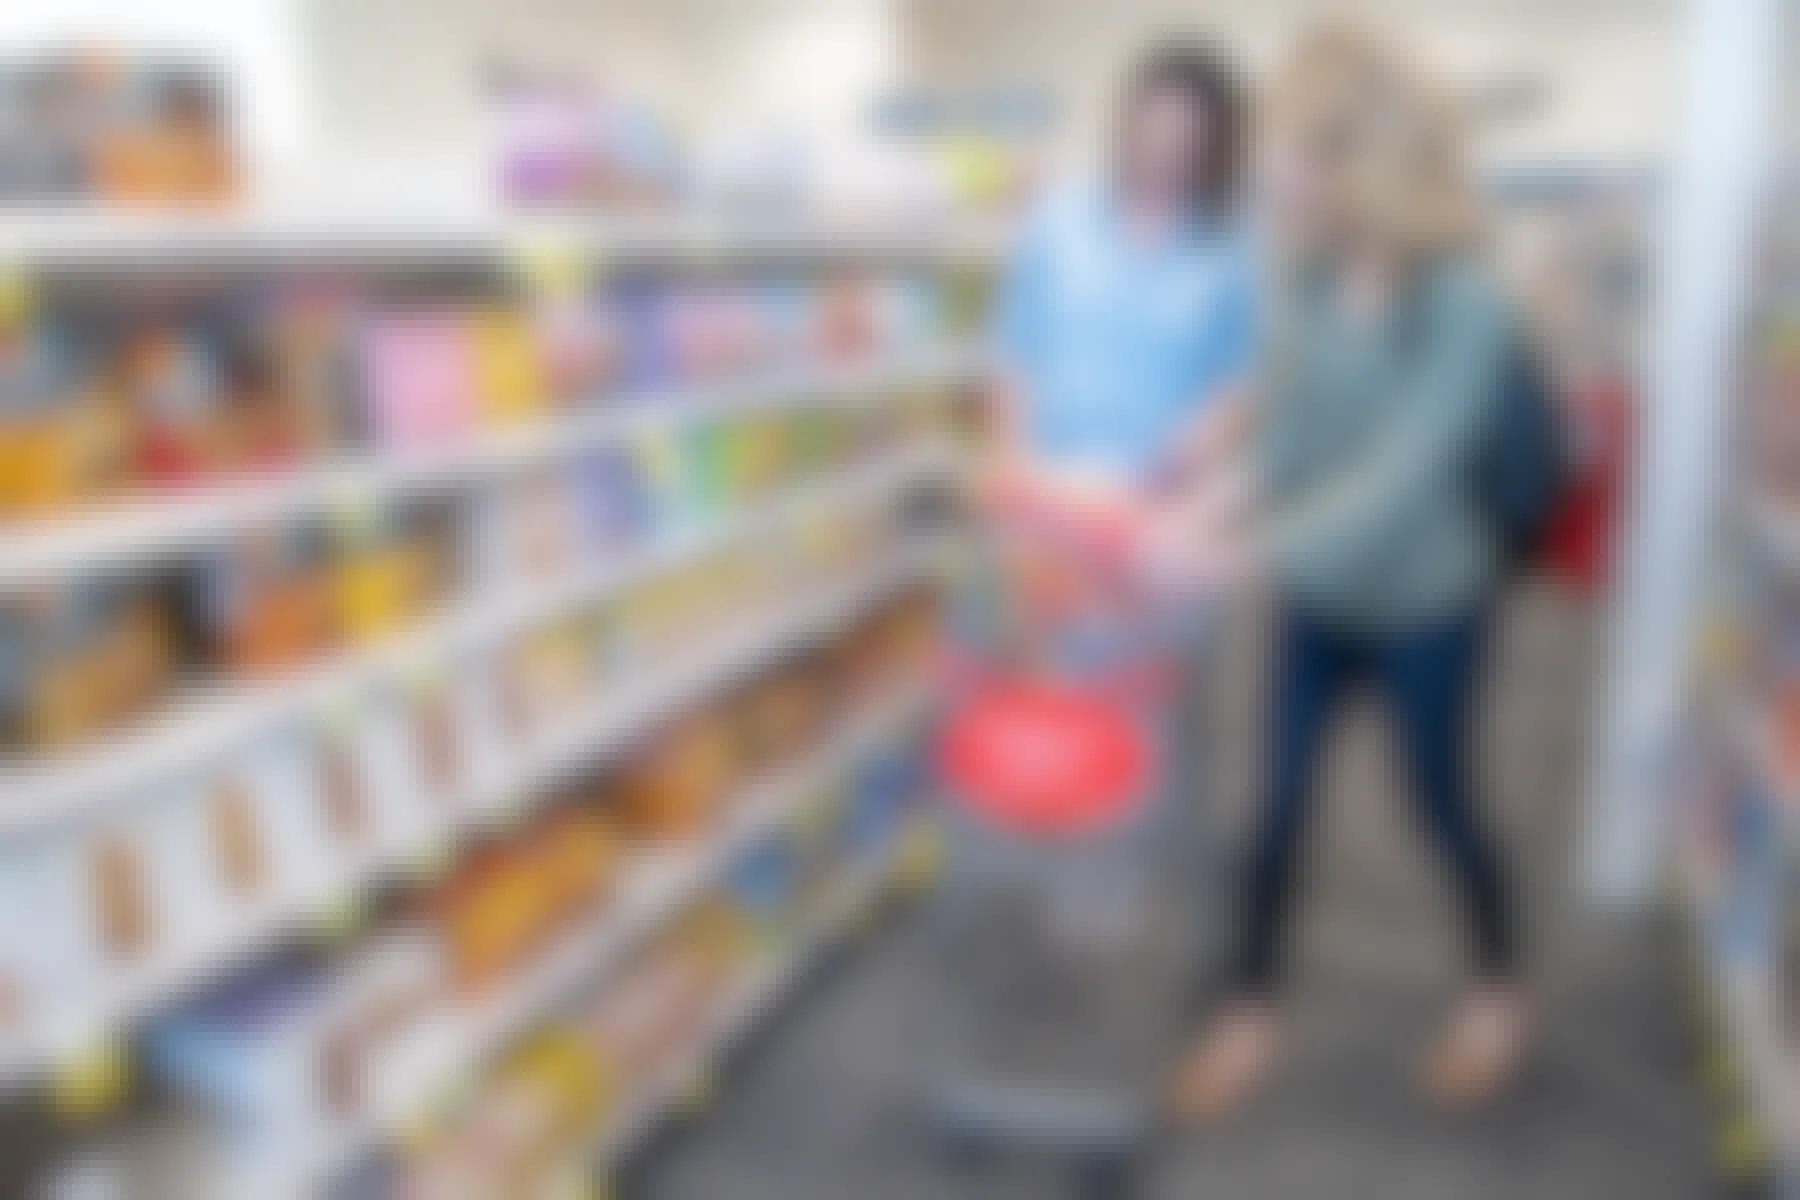 two women putting cereal in cvs cart